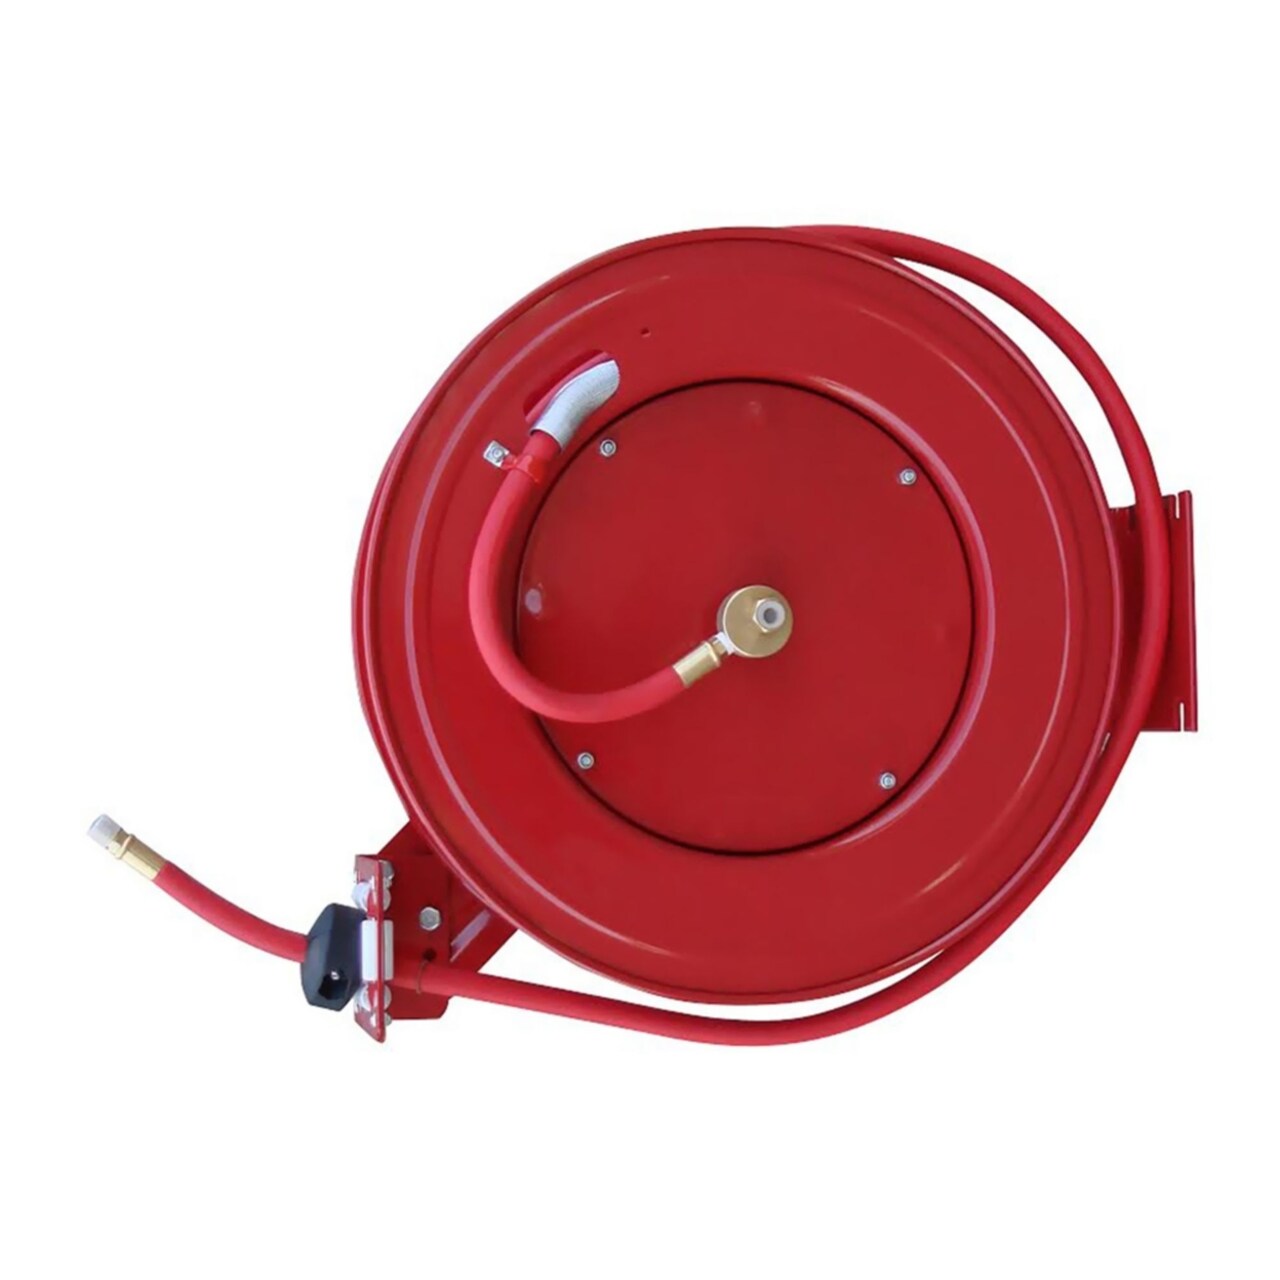 Priya Home Furniture 50 Foot Retractable Air Hose Reel with Auto